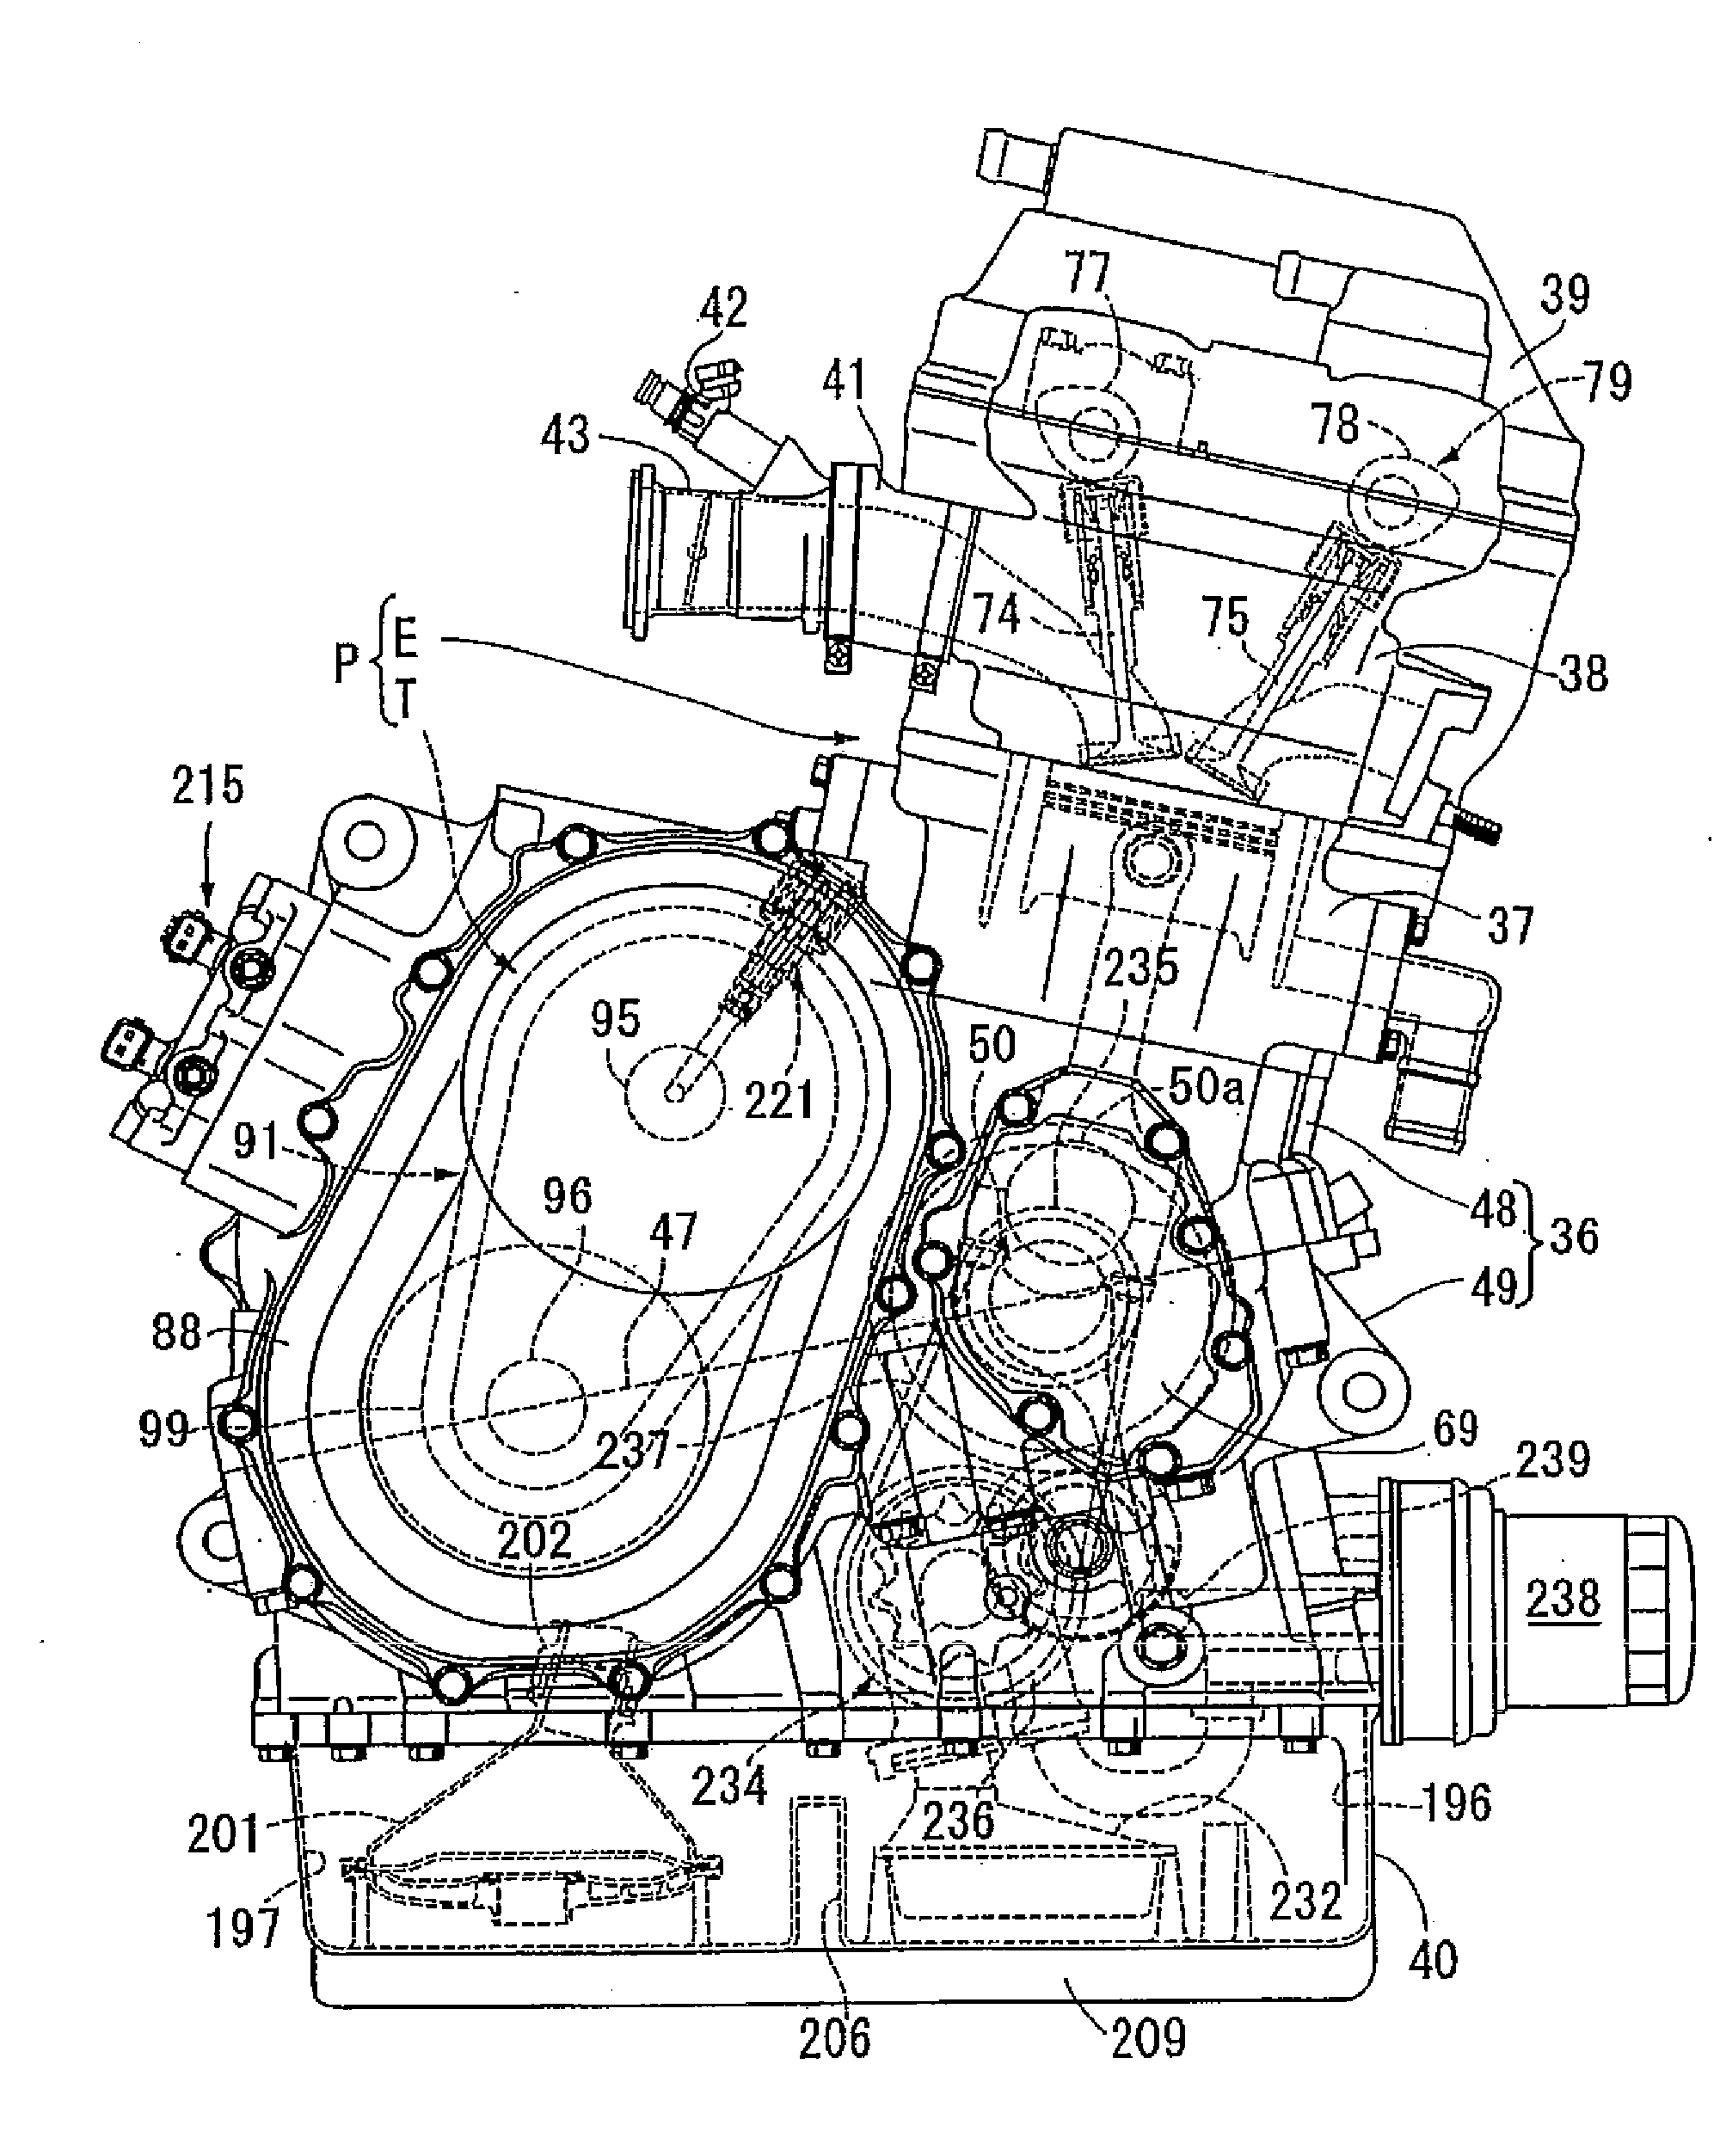 Power unit for motorcycle